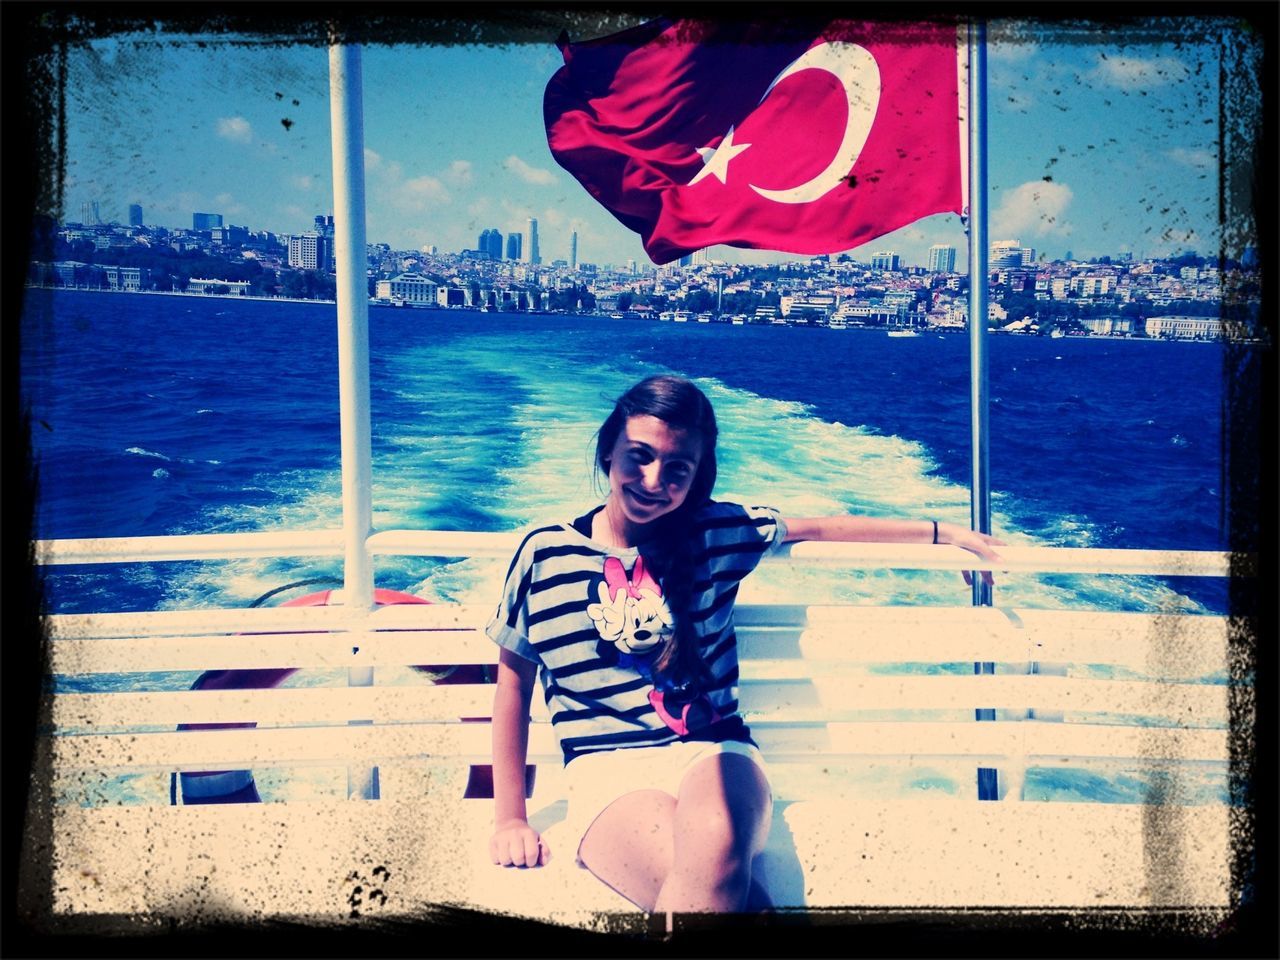 In the middle of the Bosphorus